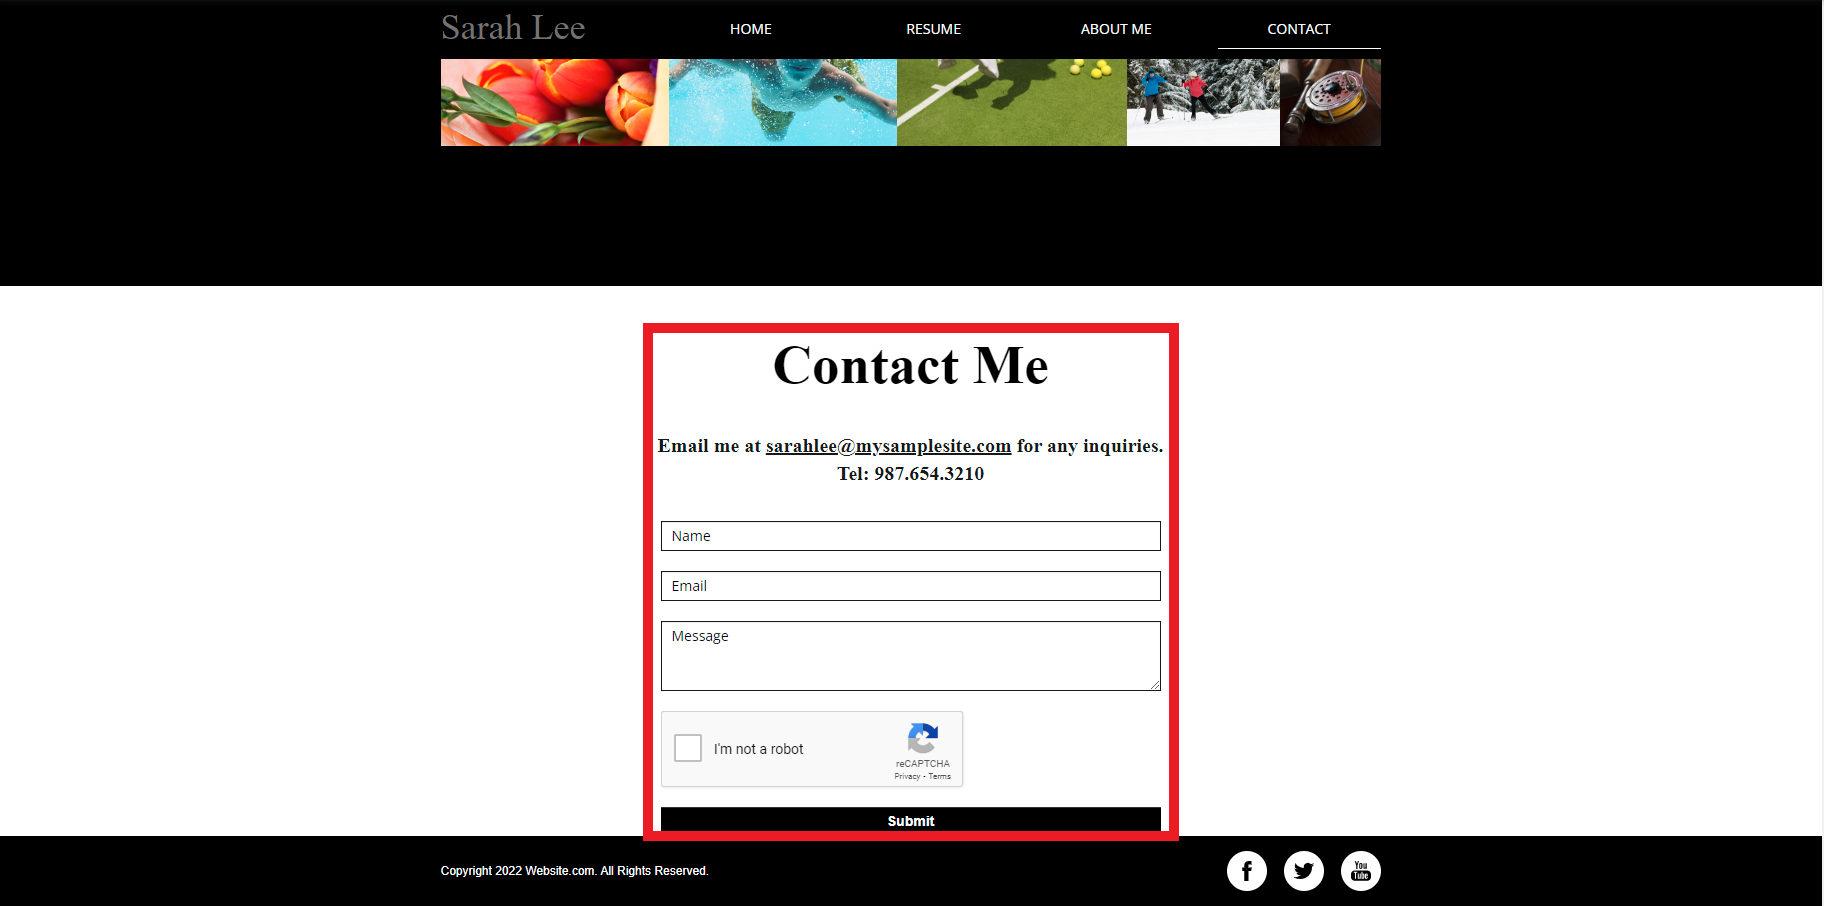 Website contact form for contact